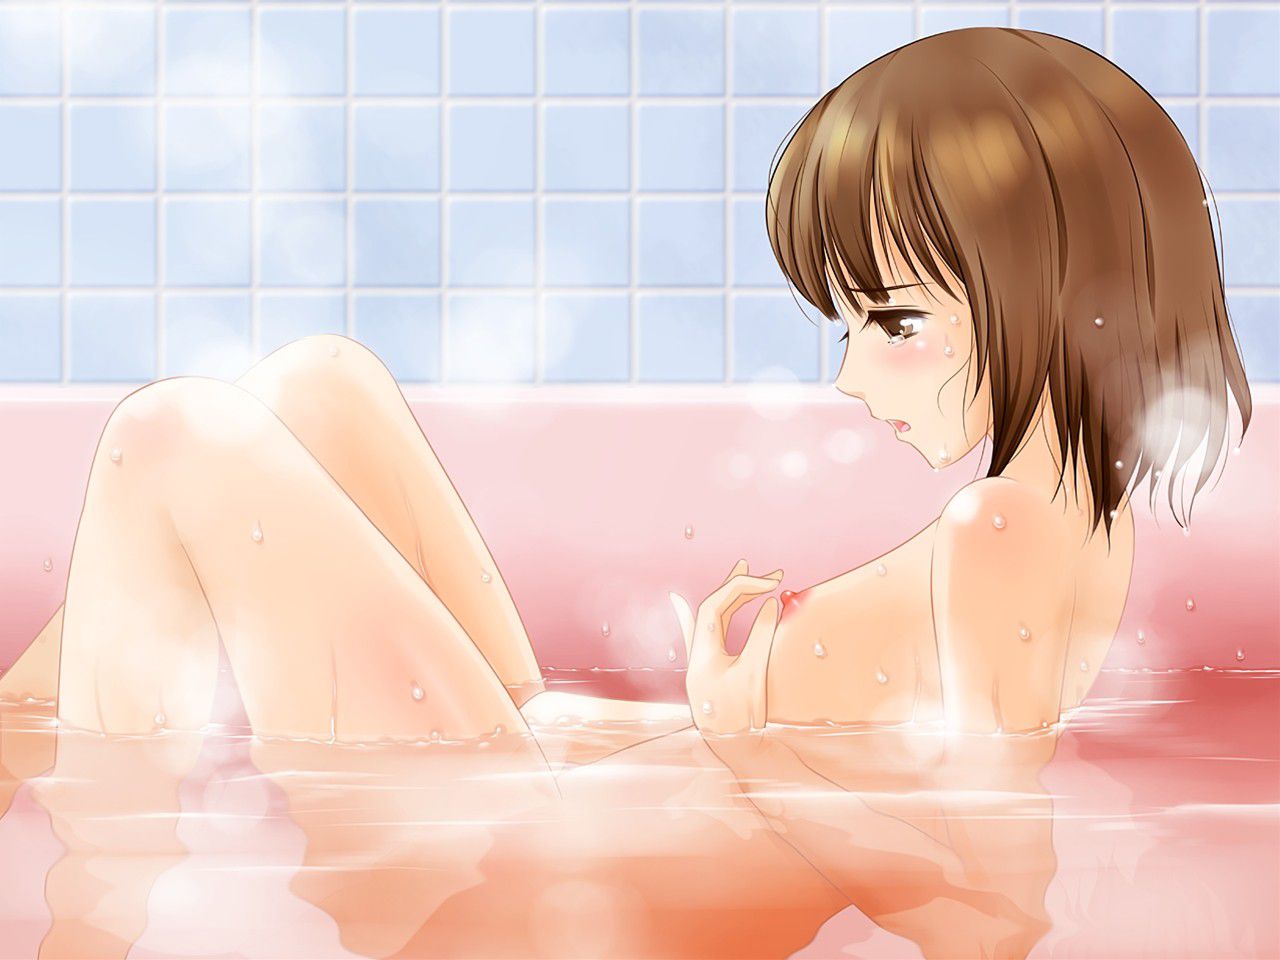 【Secondary erotica】 Here is an erotic image of a naughty girl who masturbates by stirring her own 5